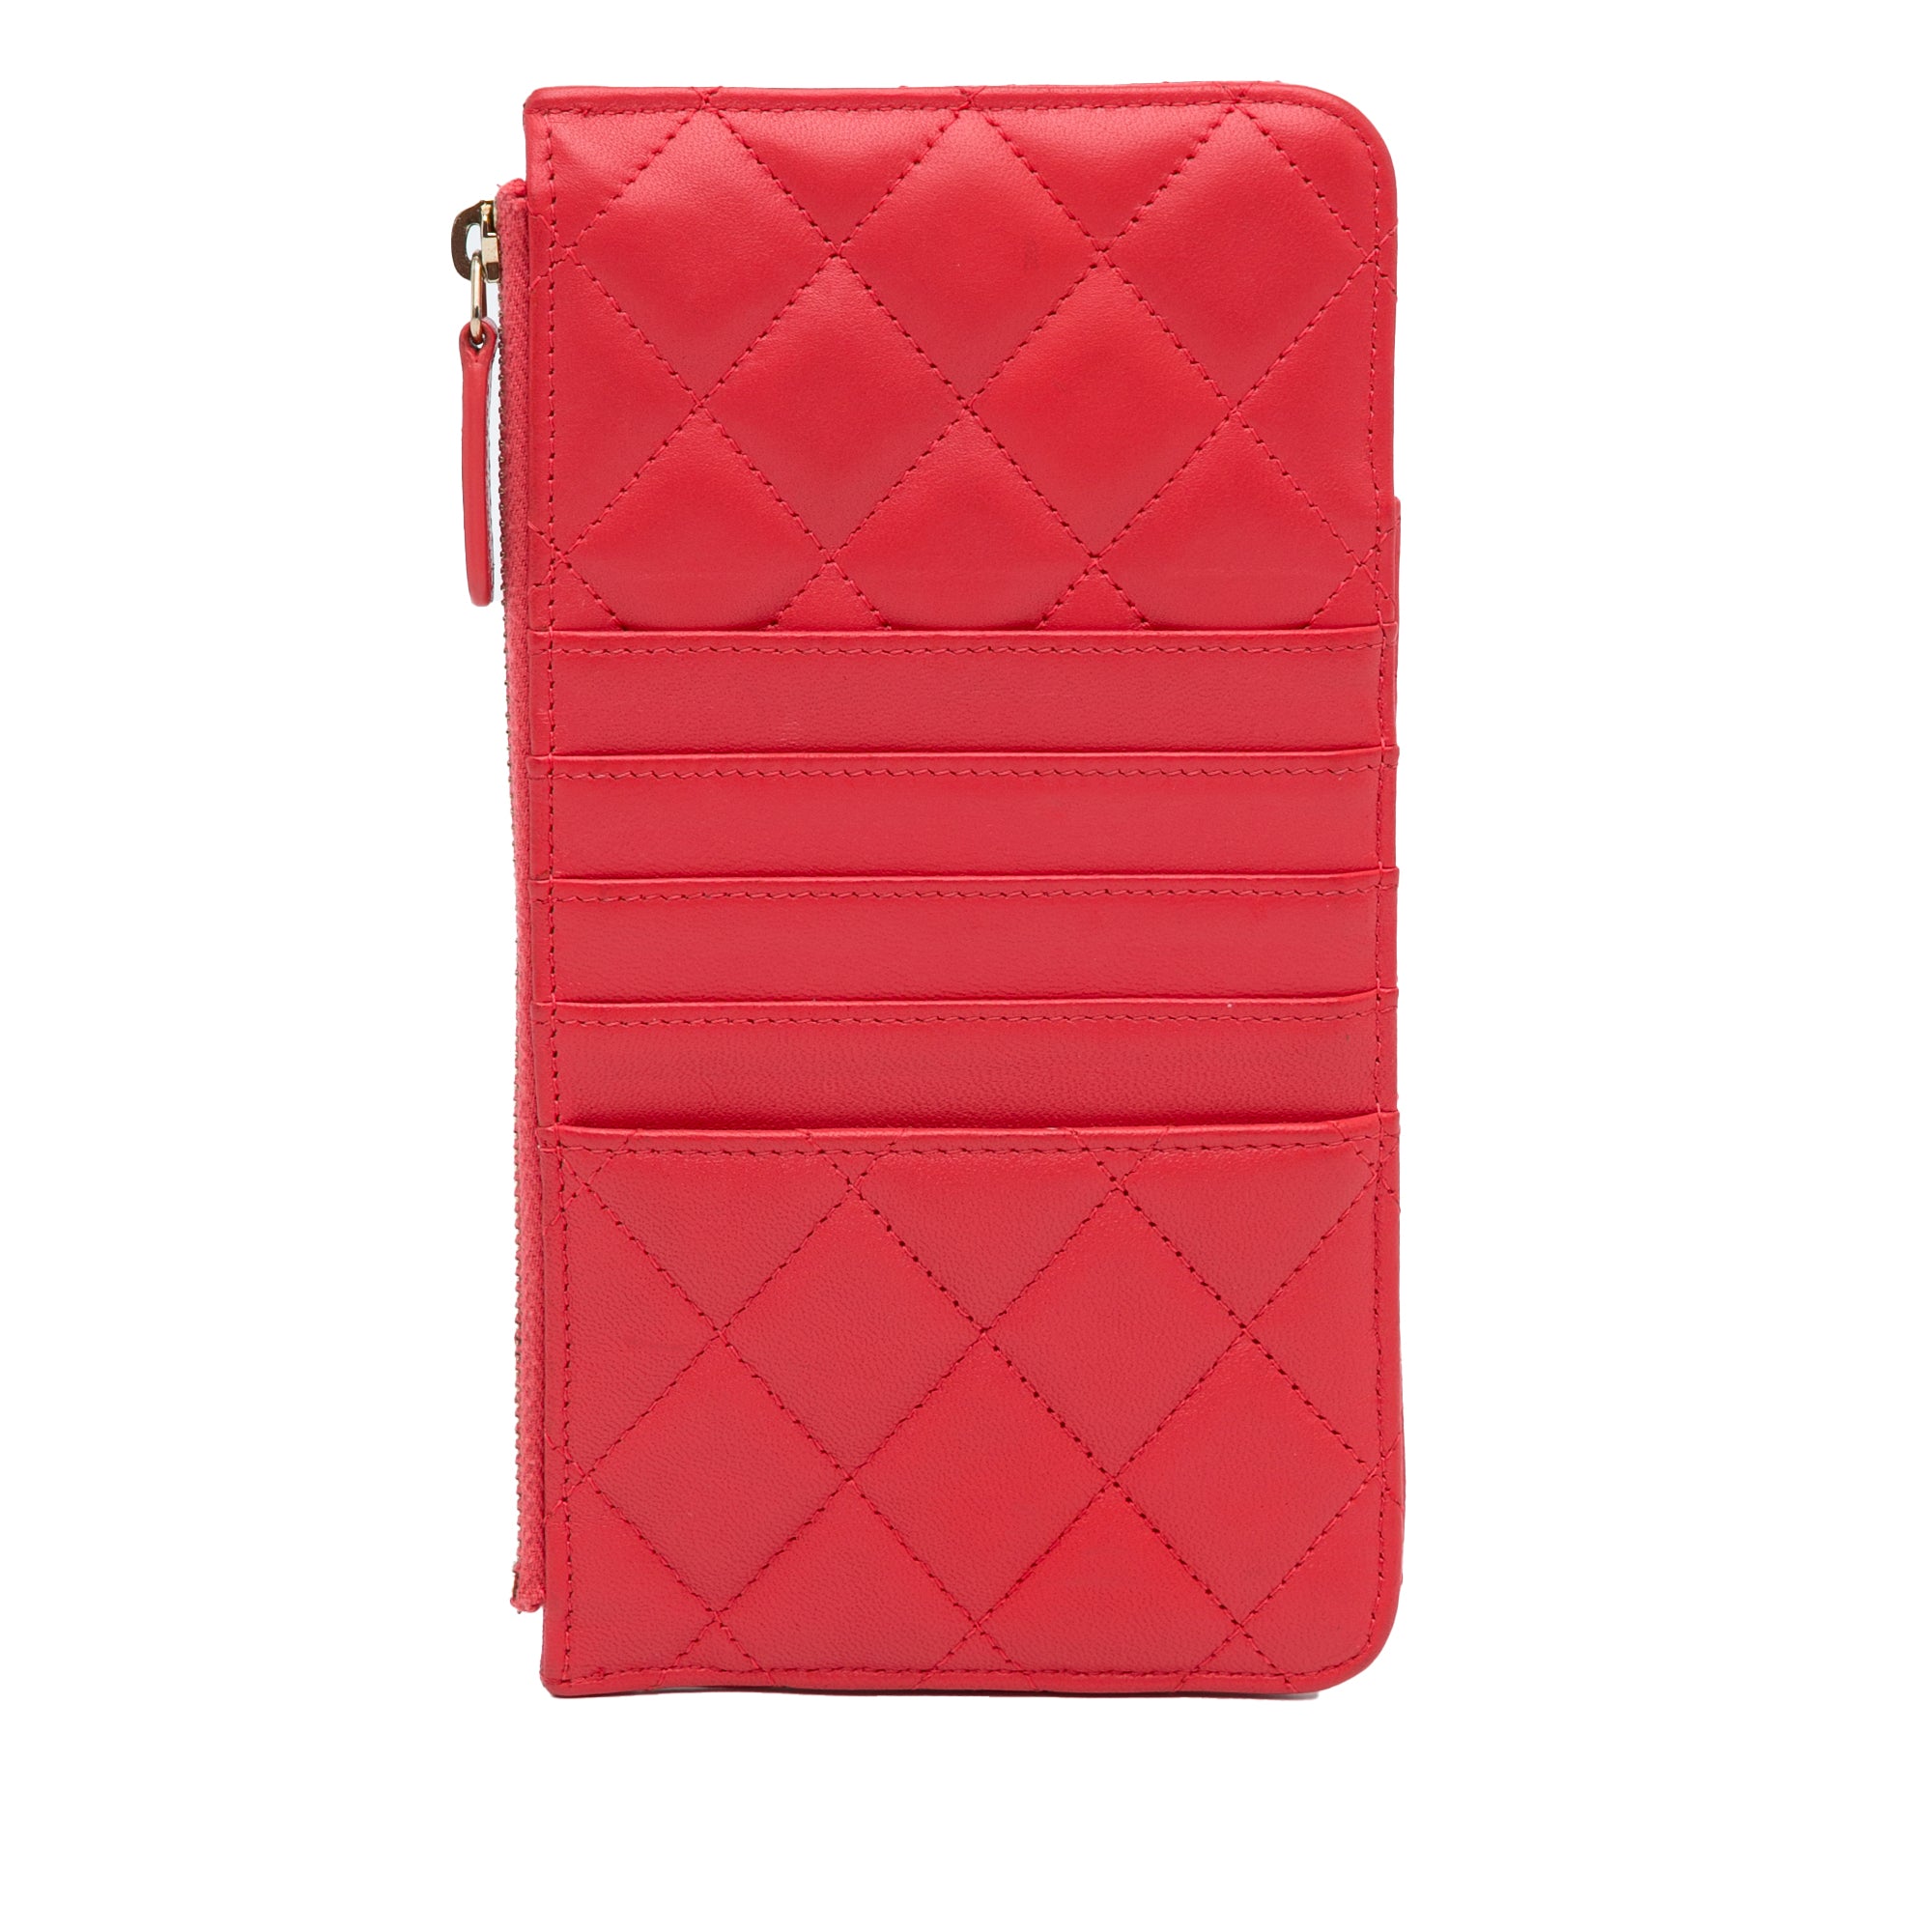 CC Quilted Lambskin Flat Wallet